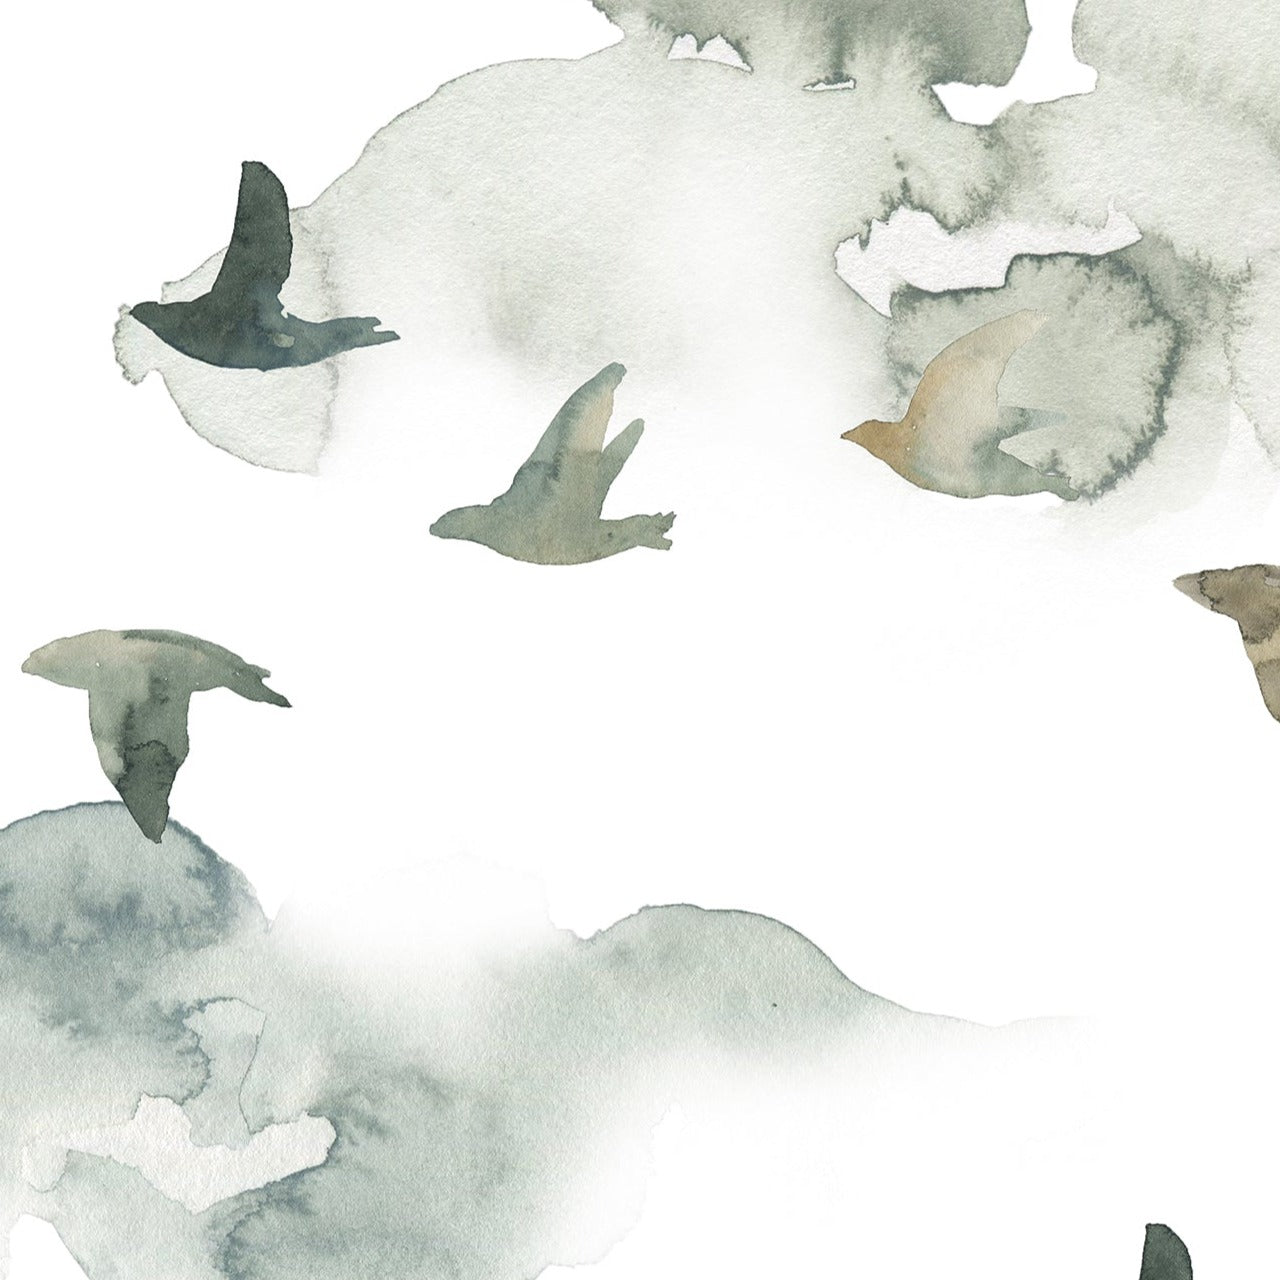 A close-up of the "Wild Pinery Wallpaper," featuring abstract watercolor pine trees and birds in flight. The shapes are rendered in a soft, earthy palette of greens and browns, with a wash-like effect that gives the appearance of a misty forest landscape, lending a peaceful and naturalistic feel to the wall covering.